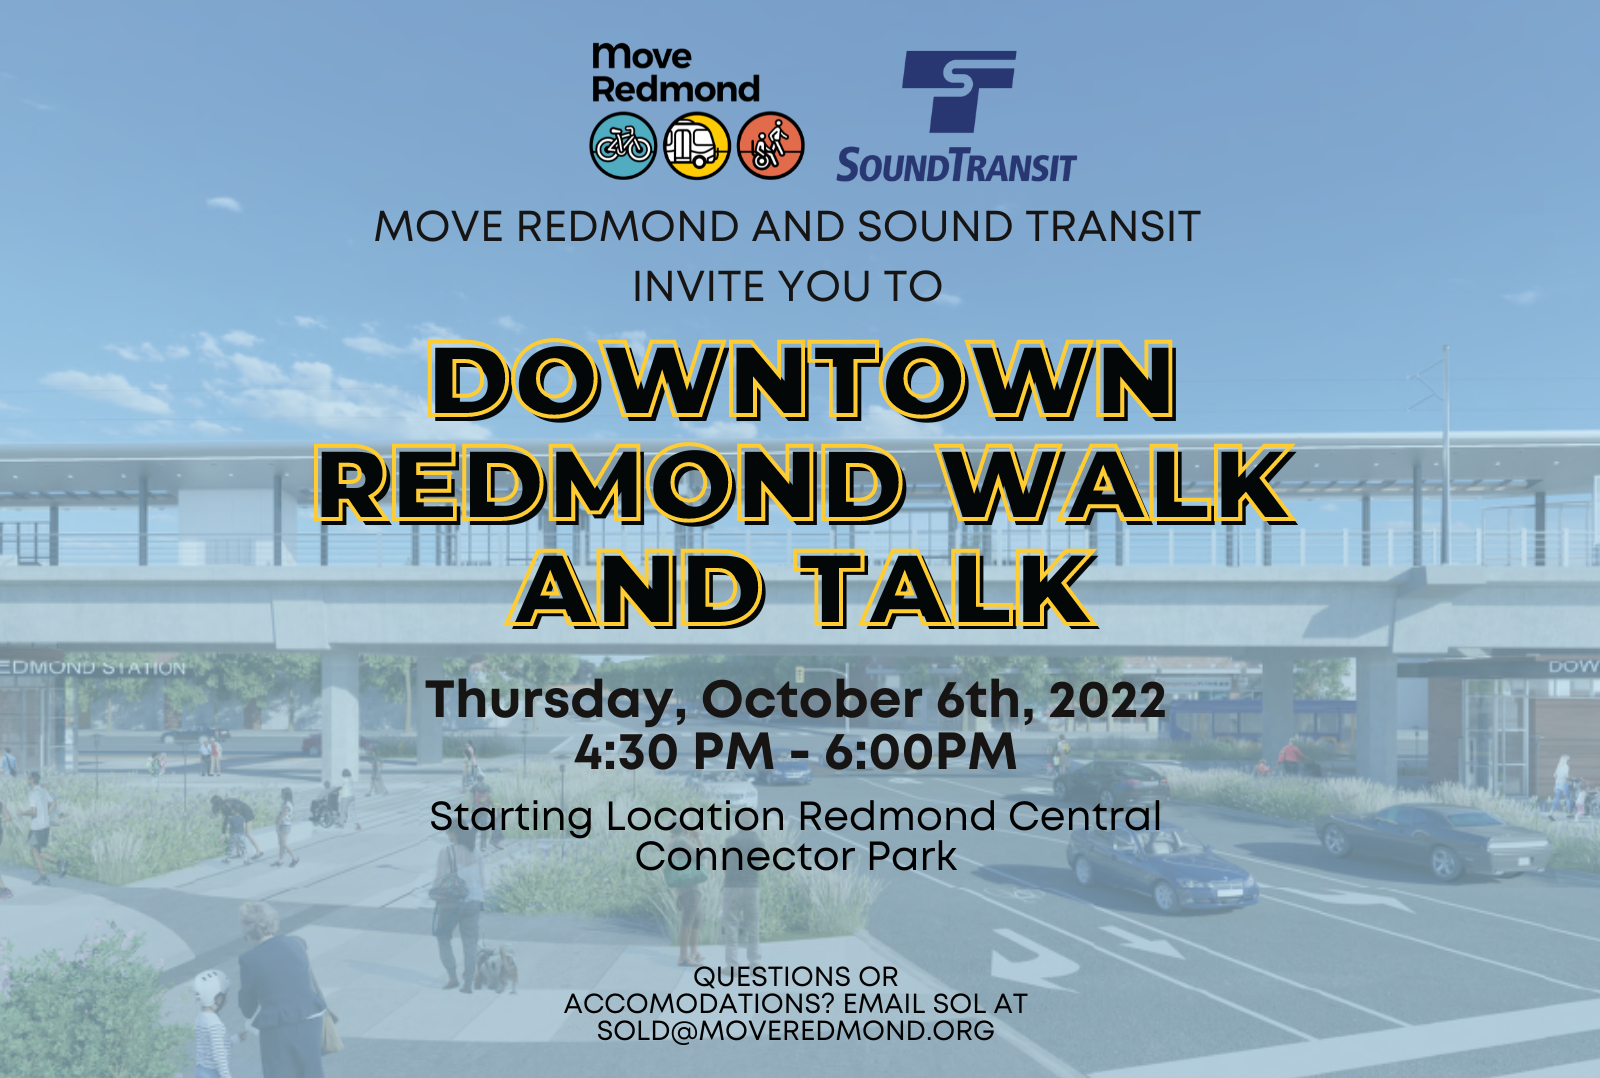 Move Redmond and Sound Transit Invite you to Downtown Redmond Walk & Talk Thursday, Oct 6th from 4:30-6 Pm starting location at Redmond Central Connector Park Questions or accommodations email Sold@moveredmond.orgil